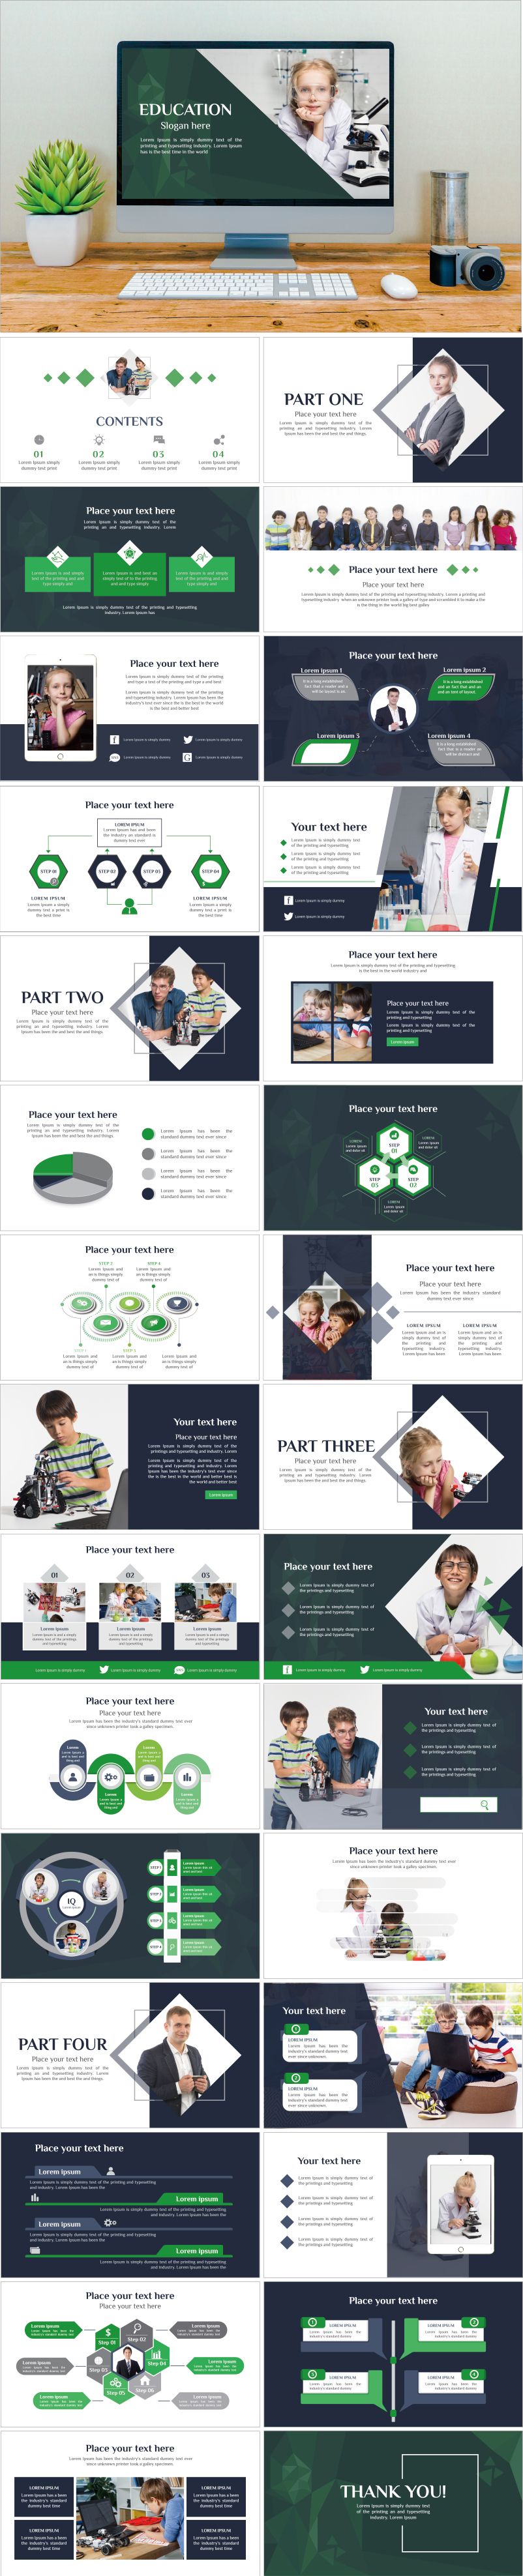 PowerPoint template vol.26